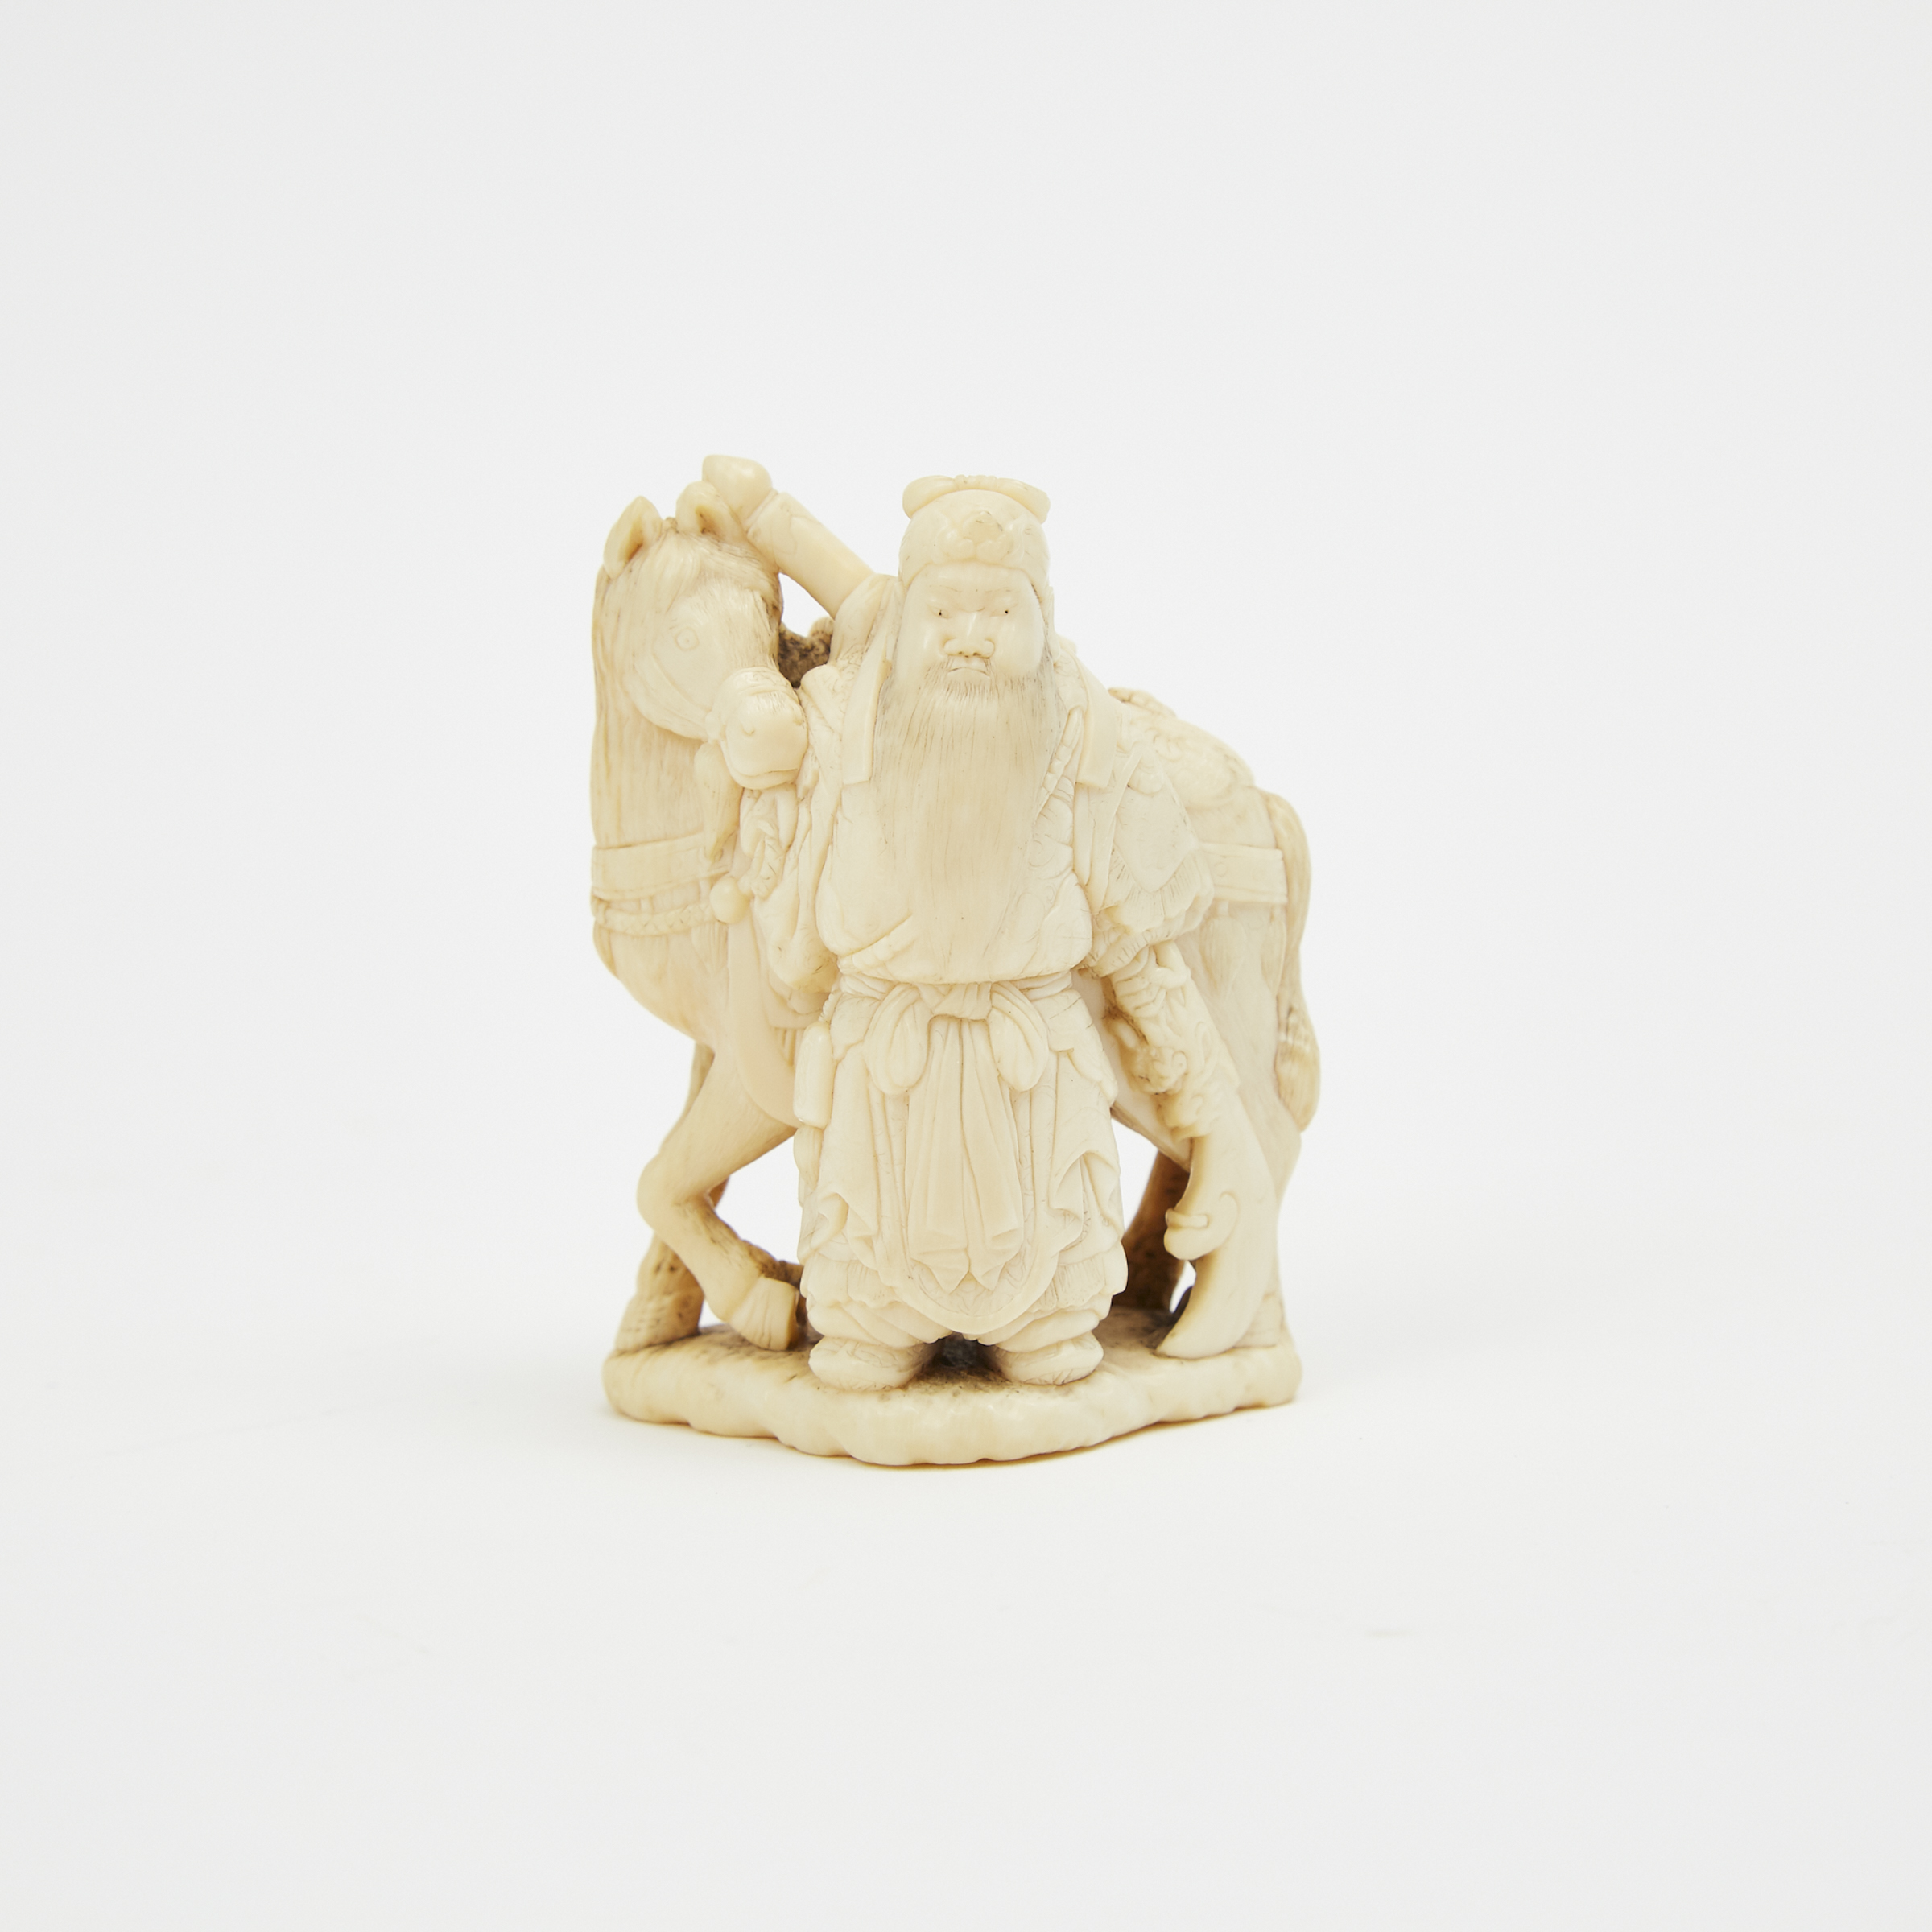 A Large Ivory Netsuke of the Chinese General Guanyu, 18th/19th Century